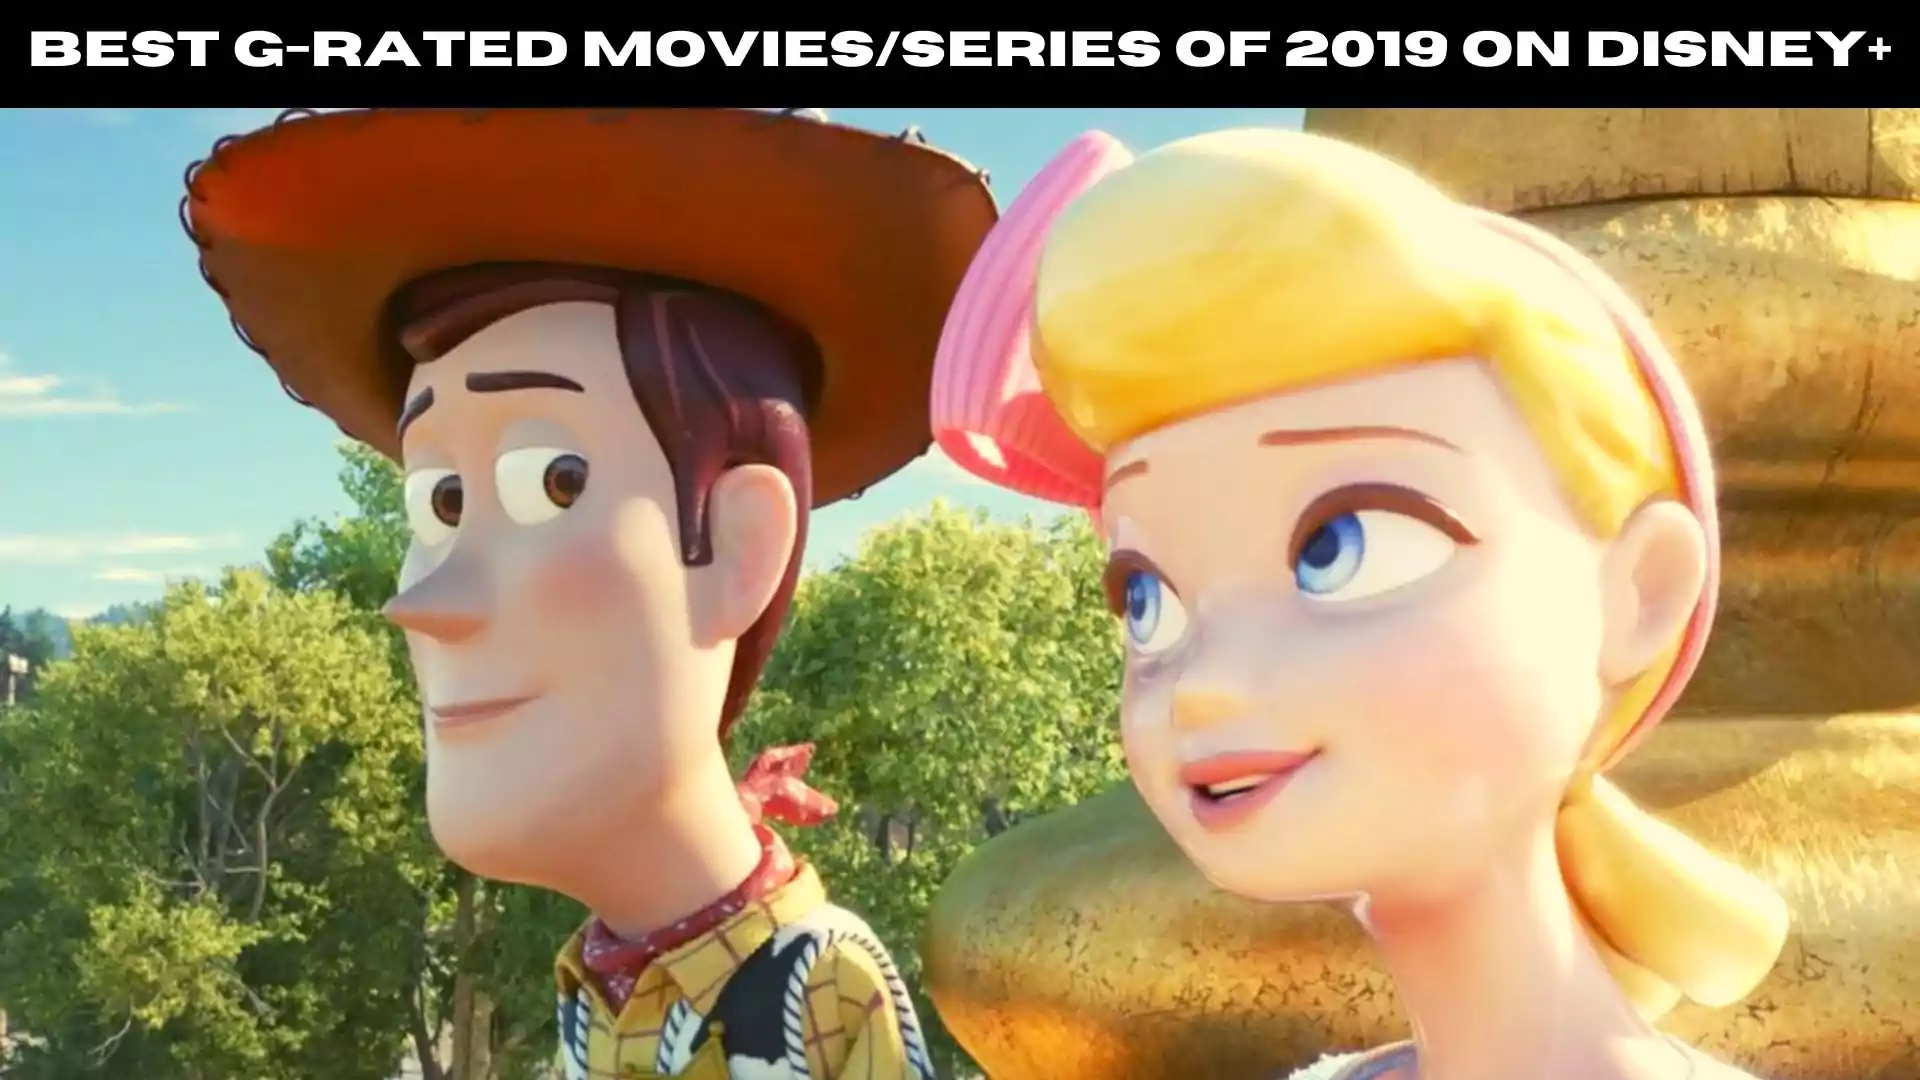 Best G-Rated Movies/series of 2019 on Disney+